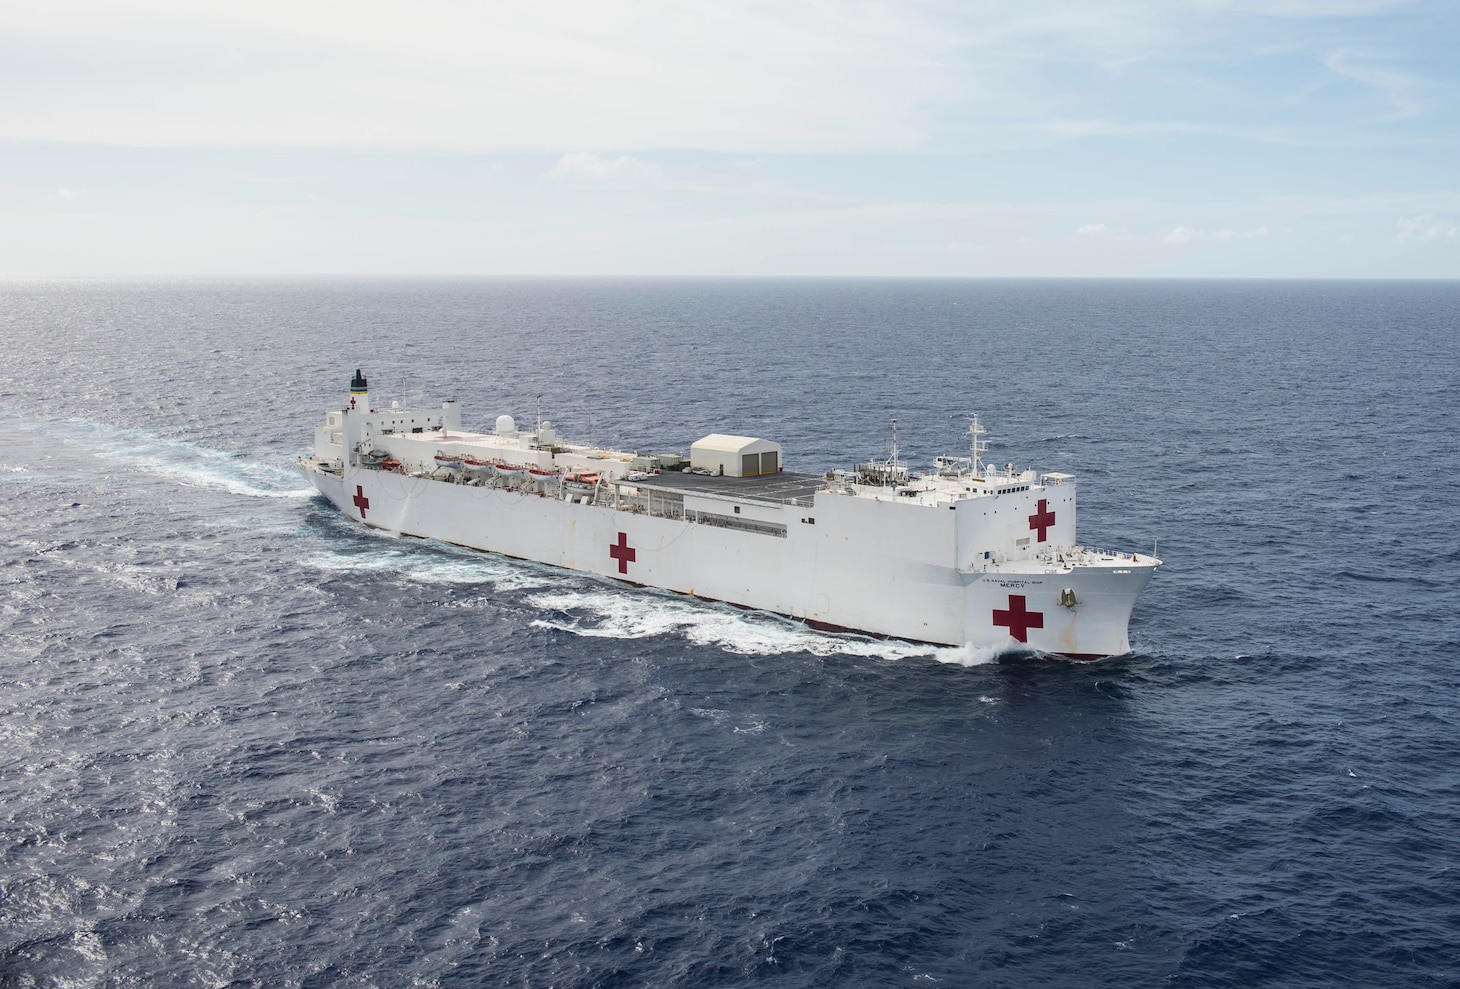 PACIFIC OCEAN (Sept. 12, 2016) USNS Mercy (T-AH 19) steams in the Pacific Ocean after completing Pacific Partnership 2016 in the Indo-Asia-Pacific region. Mercy is sailing to her homeport of San Diego.